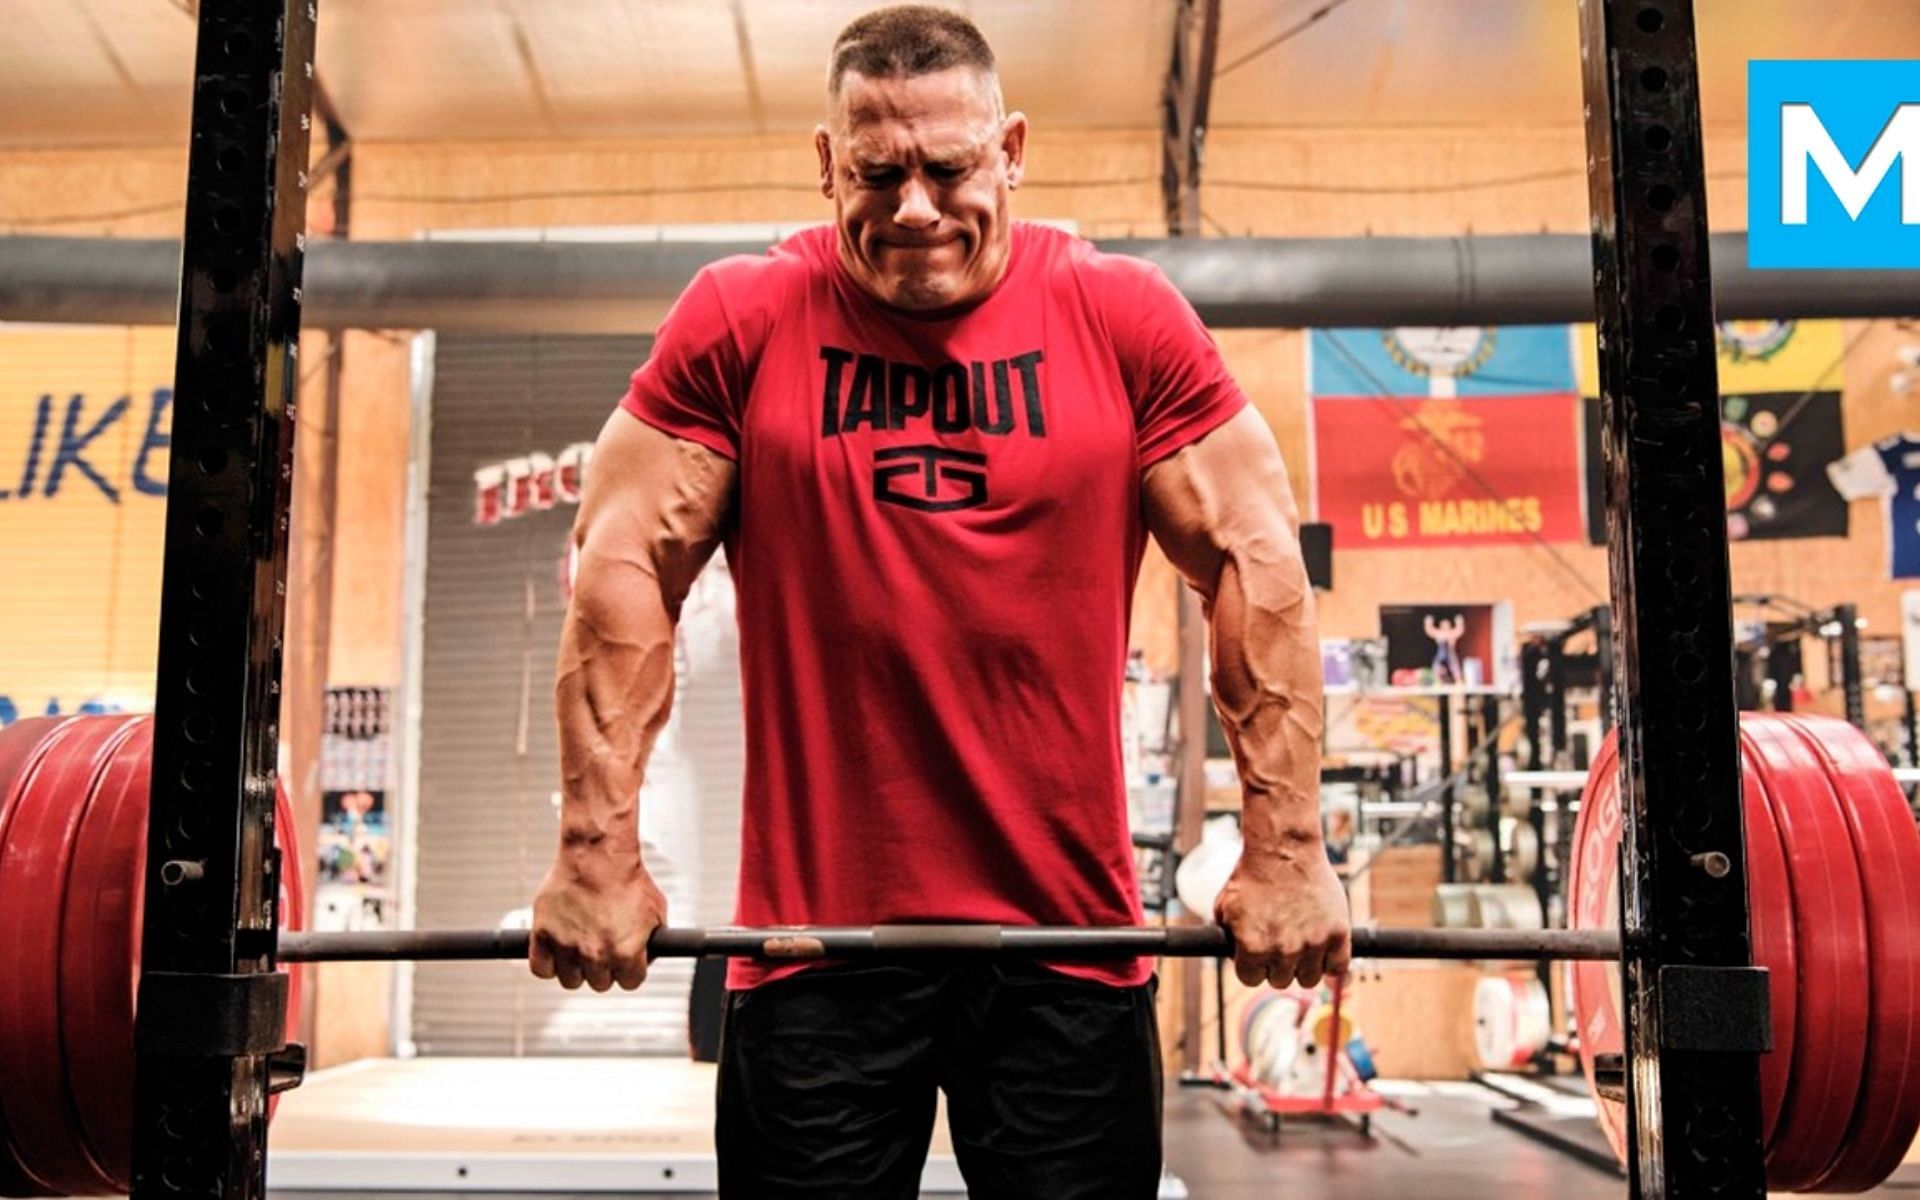 John Cena while working out in a weight room.